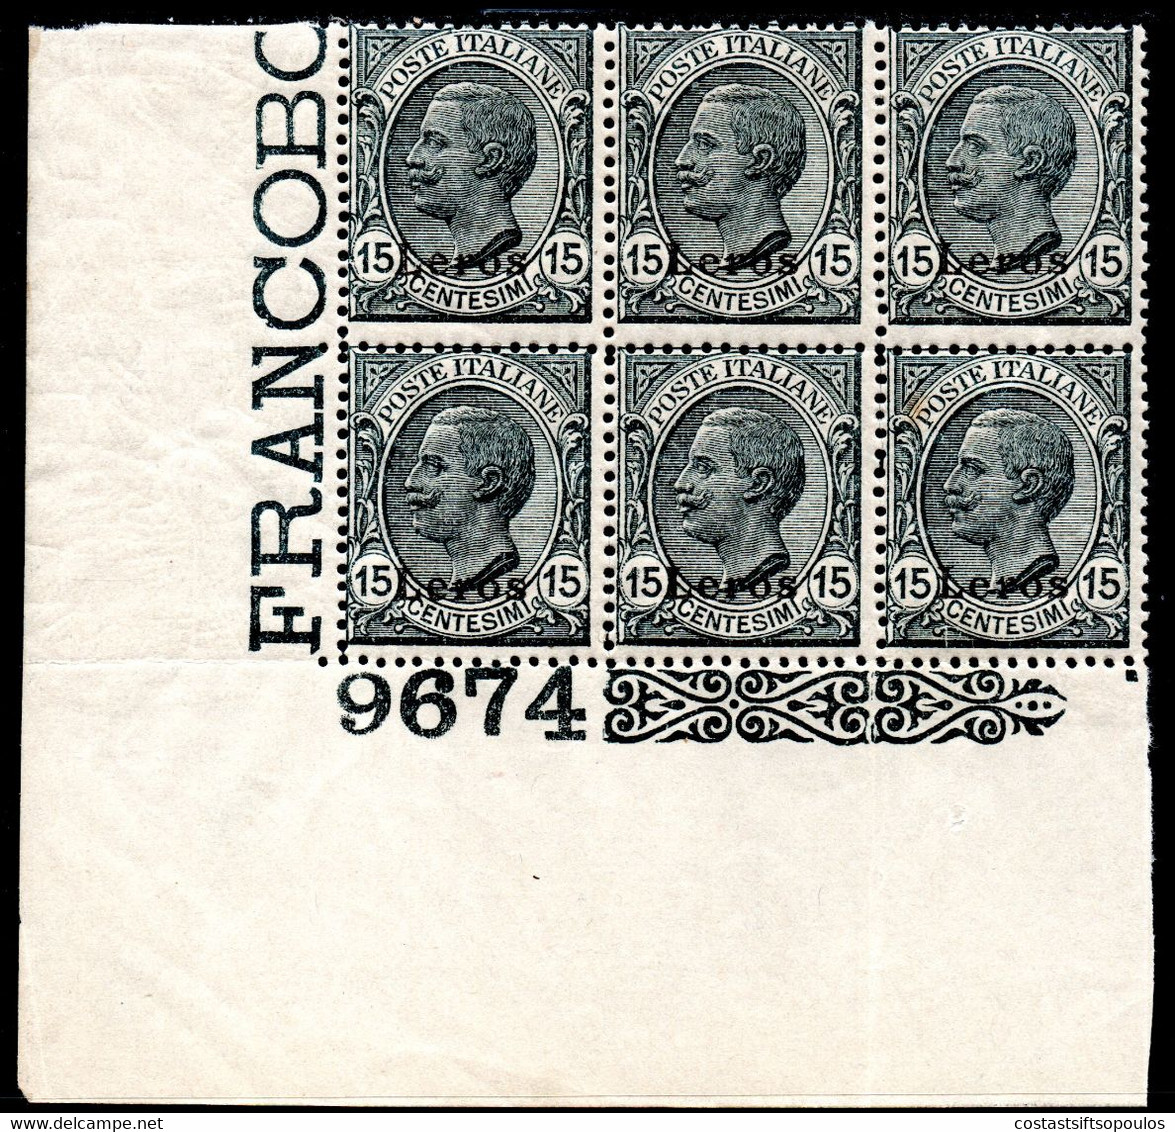 655.GREECE,DODECANESE,ITALY.LEROS.1922 15 C.#4 MNH BLOCK OF 6 - Dodecanese